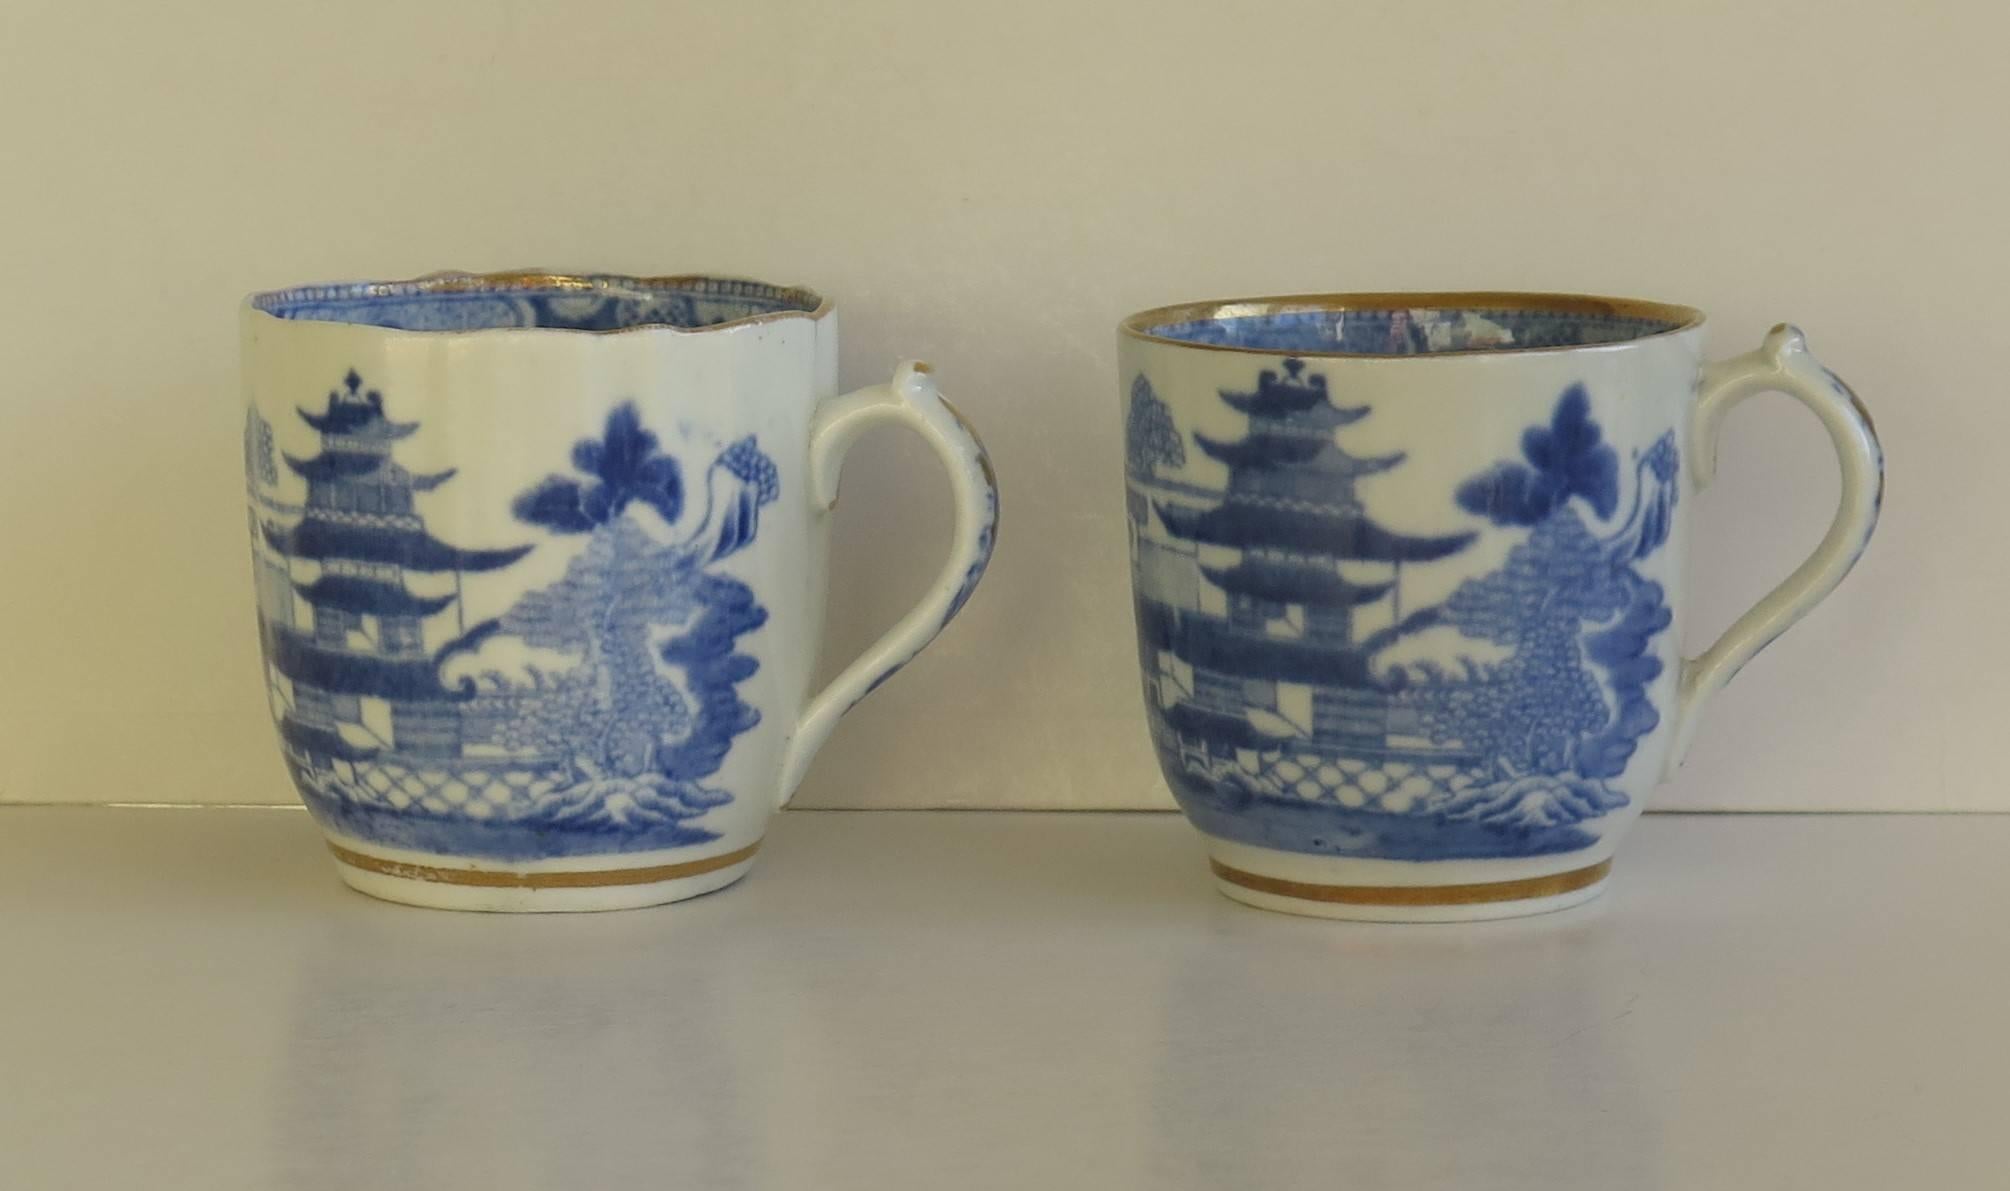 Chinoiserie Similar PAIR of Miles Mason's Coffee Cans, Porcelain, Pagoda Pattern, circa 1800